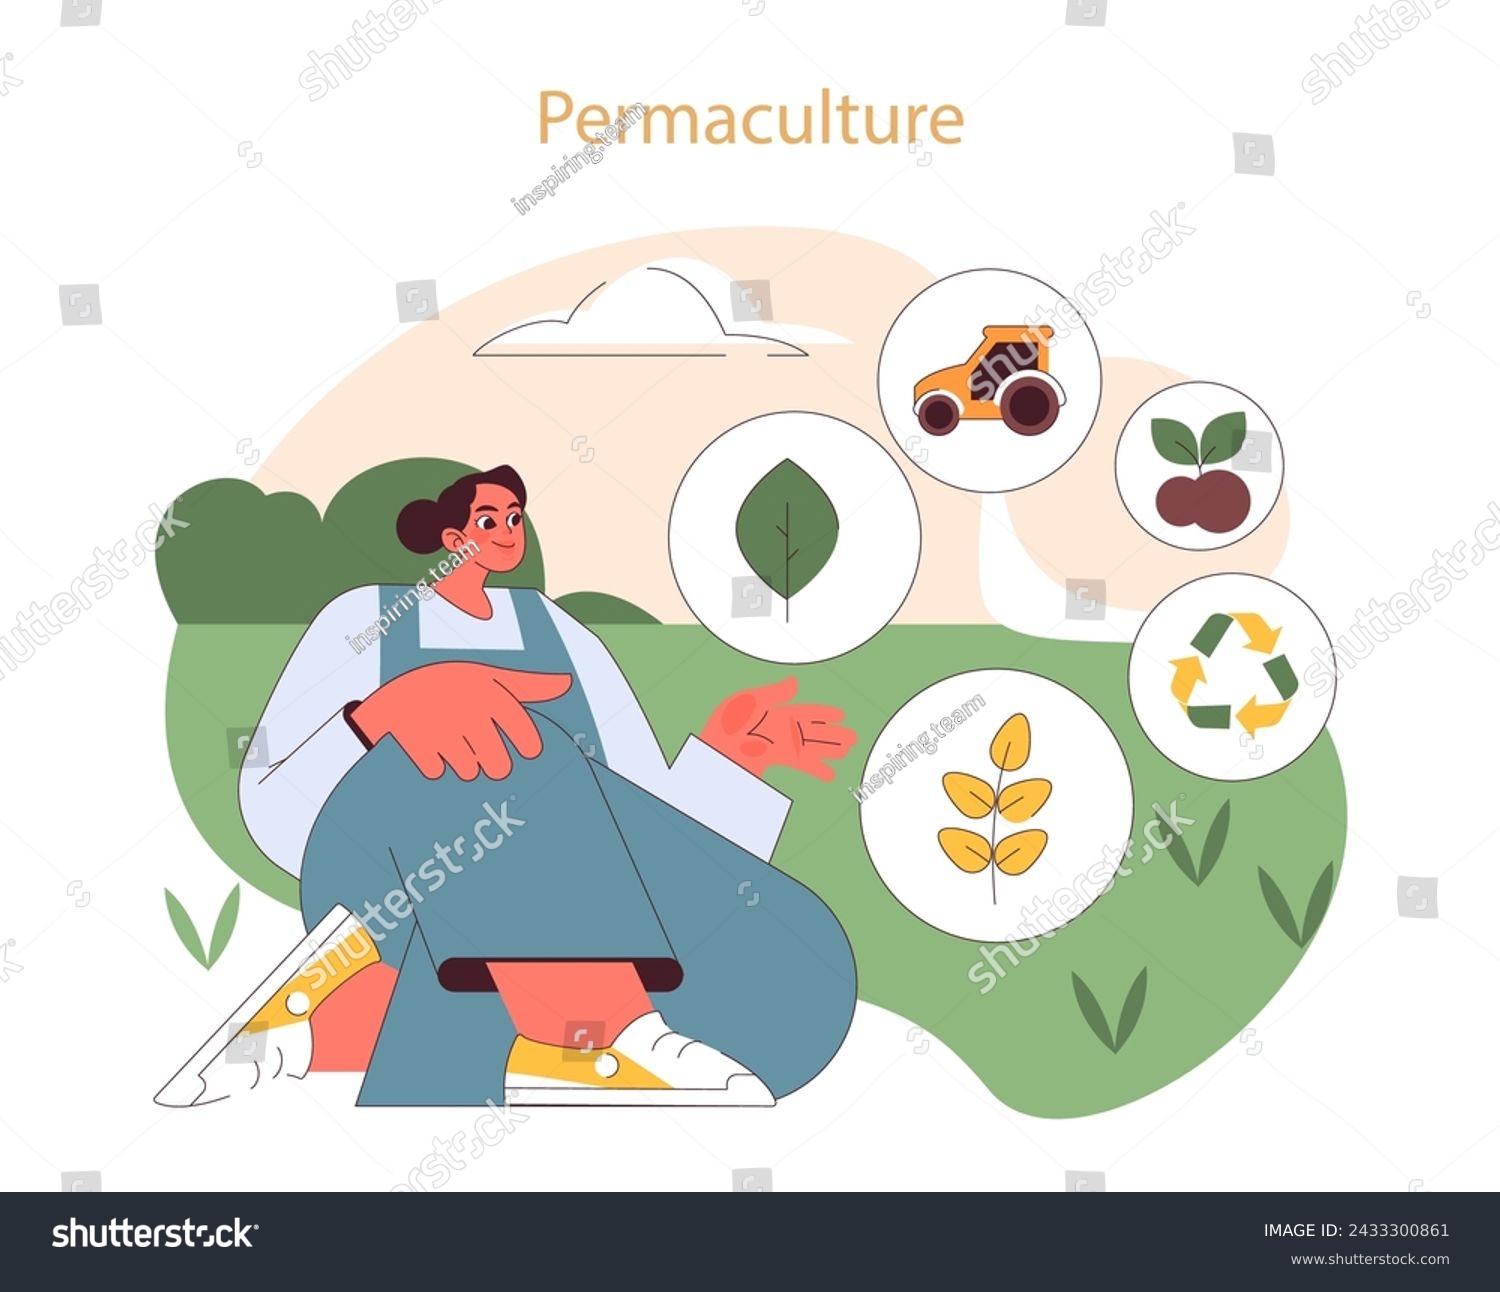 SVG of Permaculture concept. Individual demonstrates circular system of sustainable agriculture with icons for recycling, plants, and equipment. svg